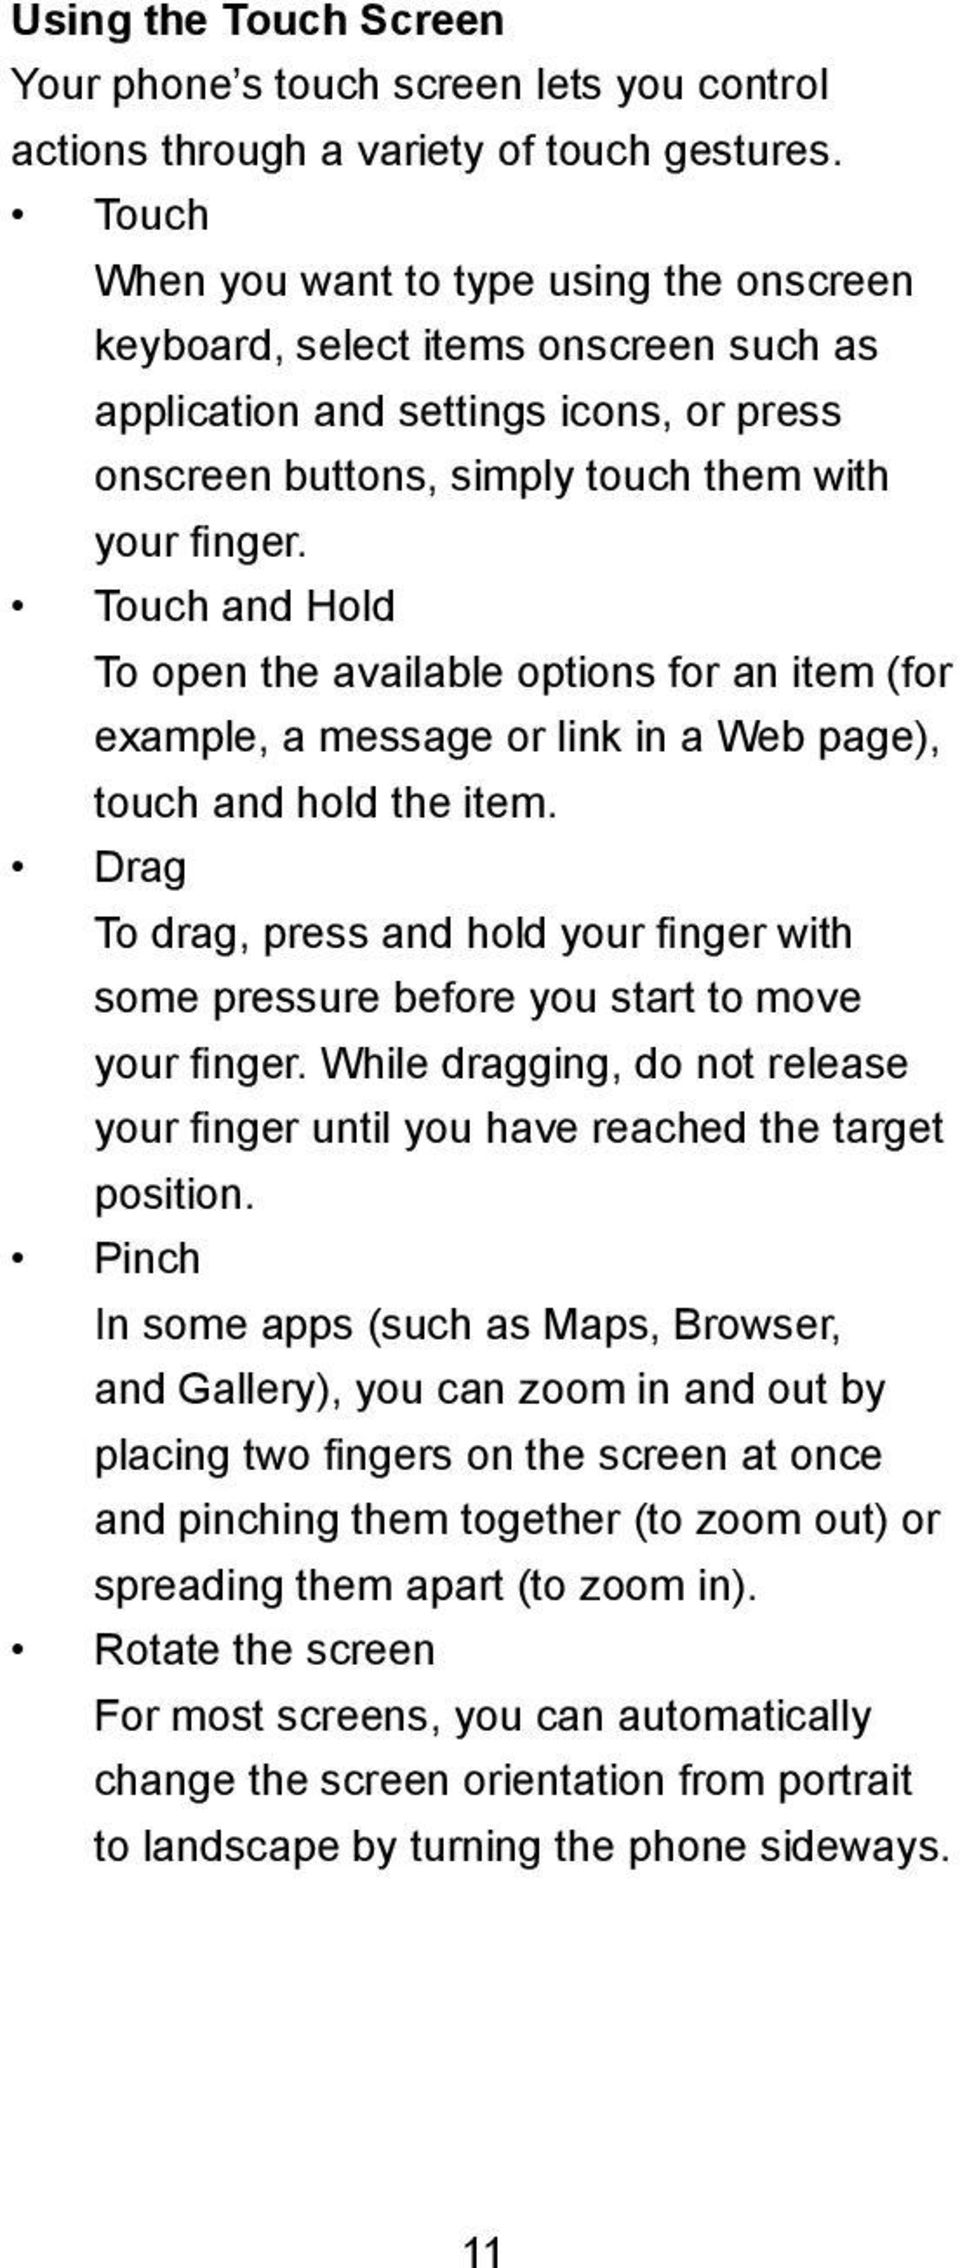 Touch and Hold To open the available options for an item (for example, a message or link in a Web page), touch and hold the item.